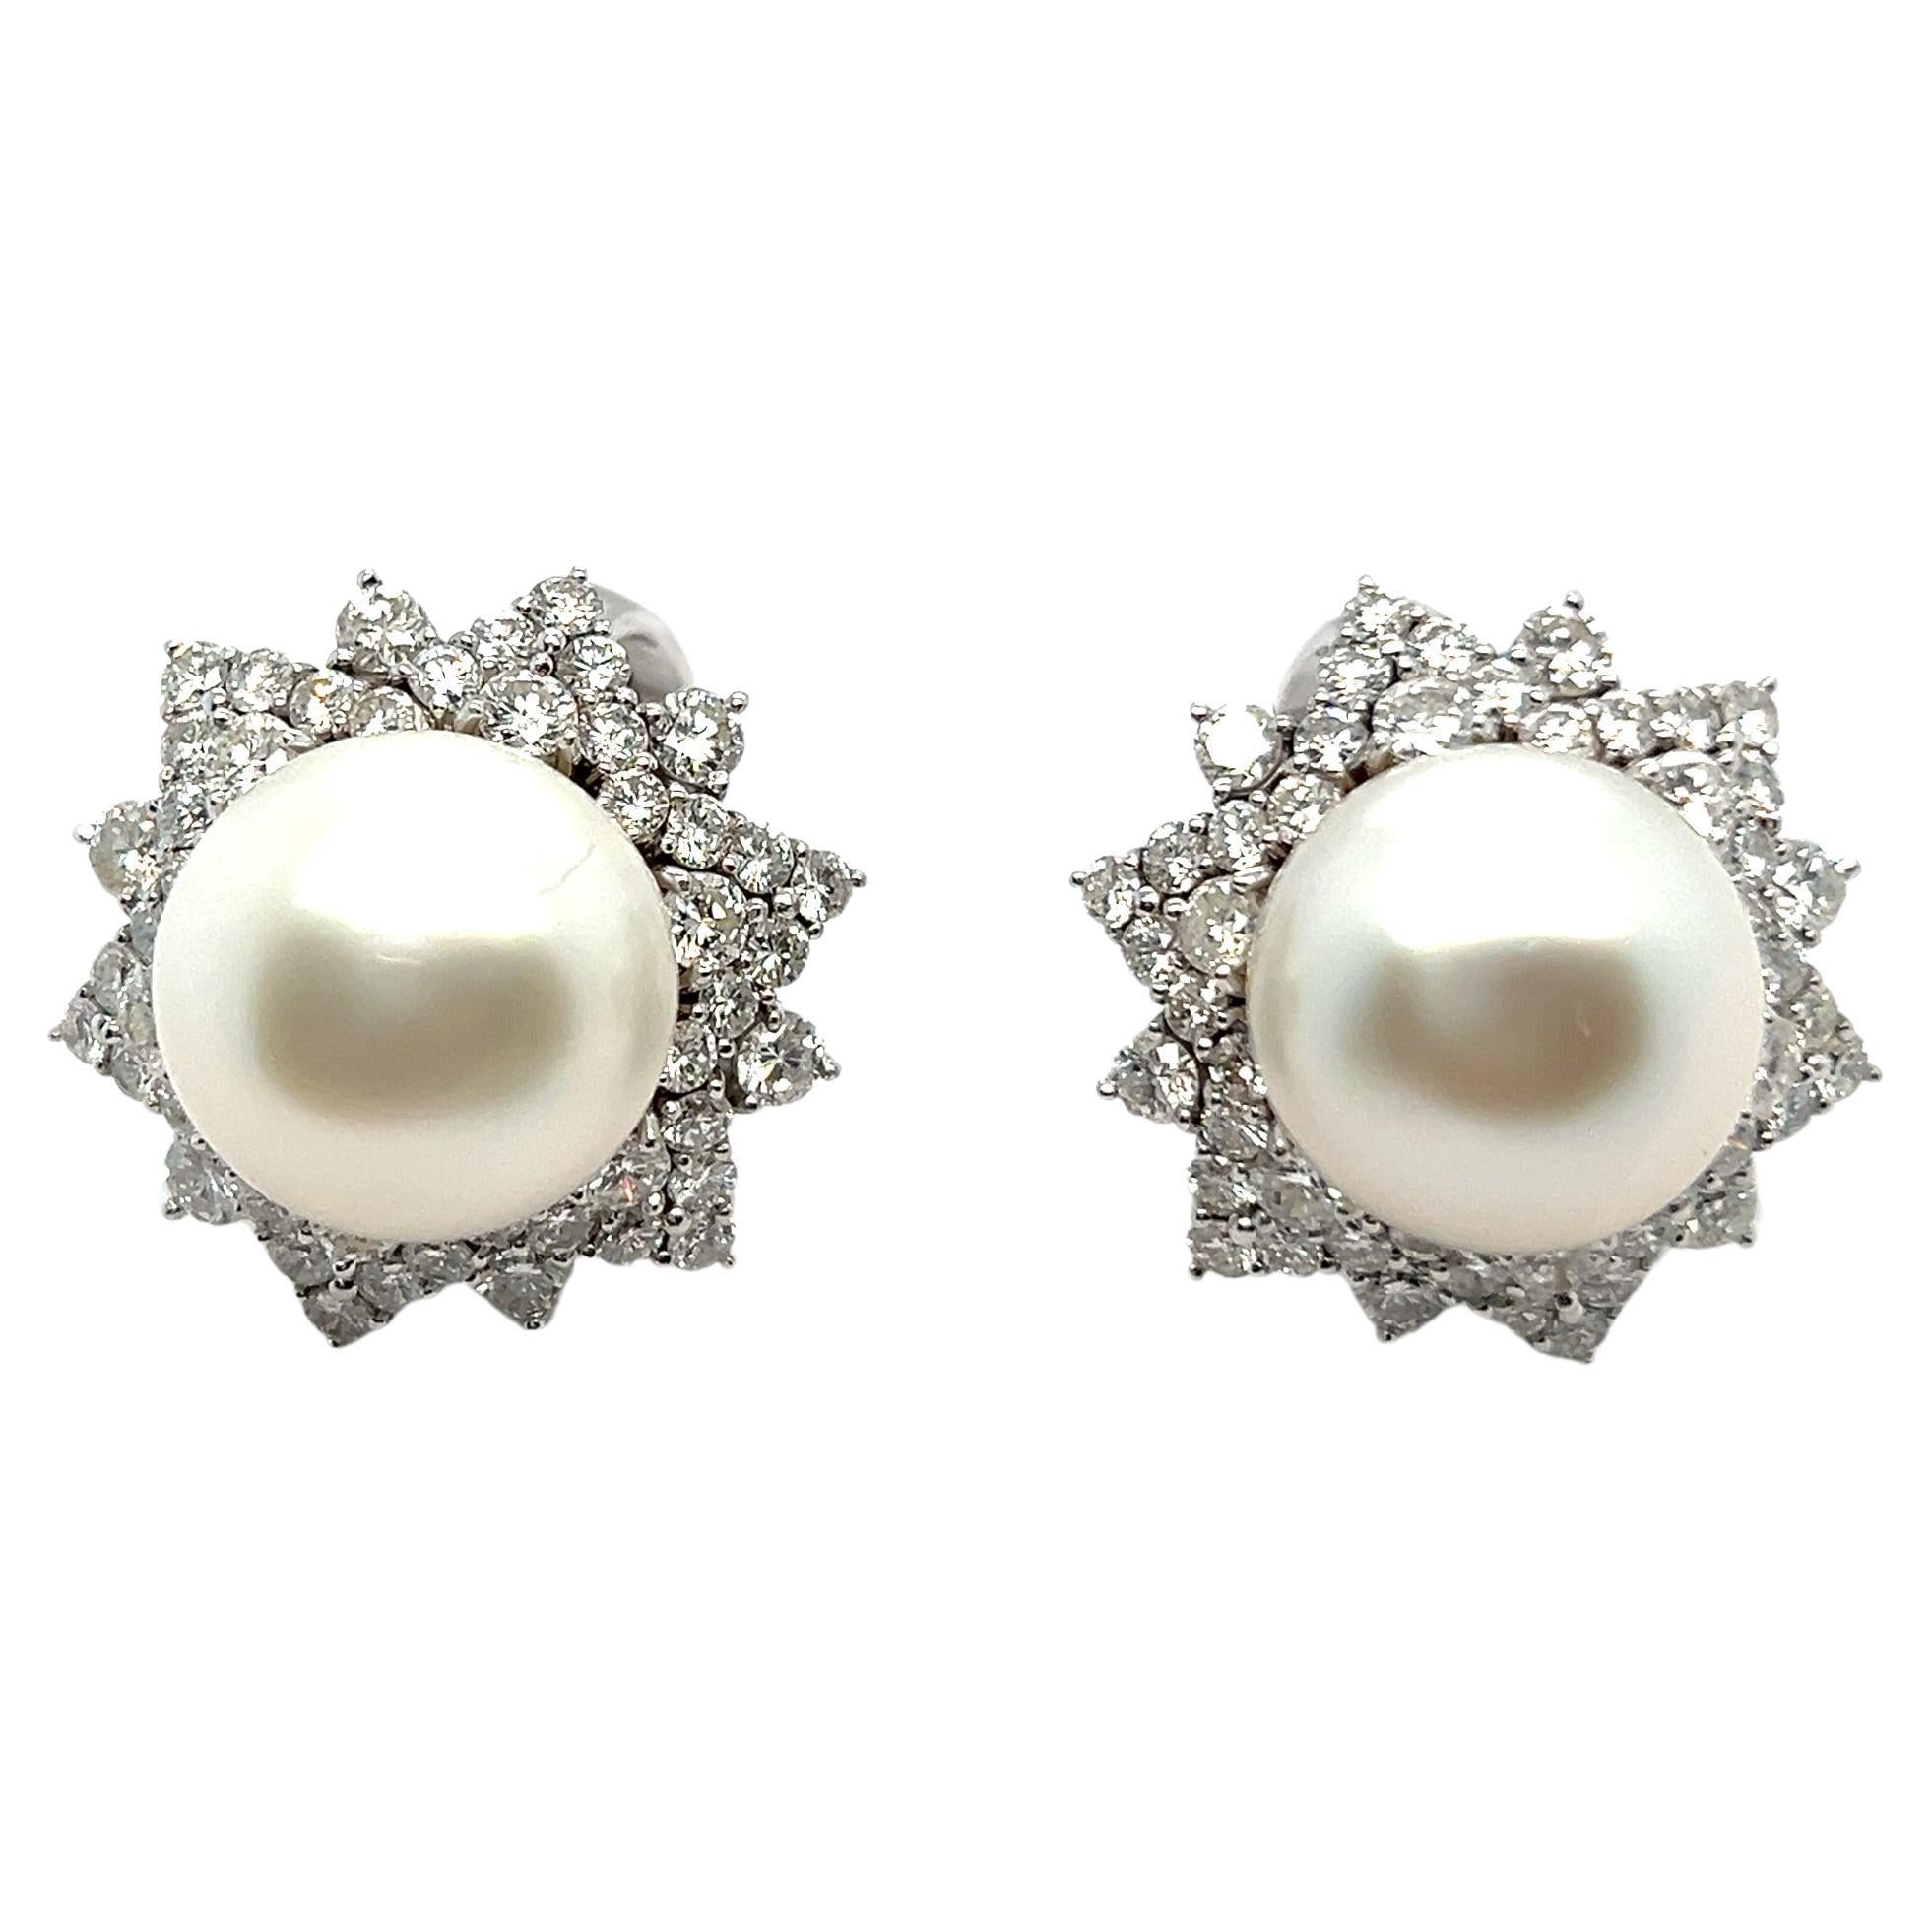 South Sea Pearl Earrings in 18 Karat White Gold by Meister For Sale 1